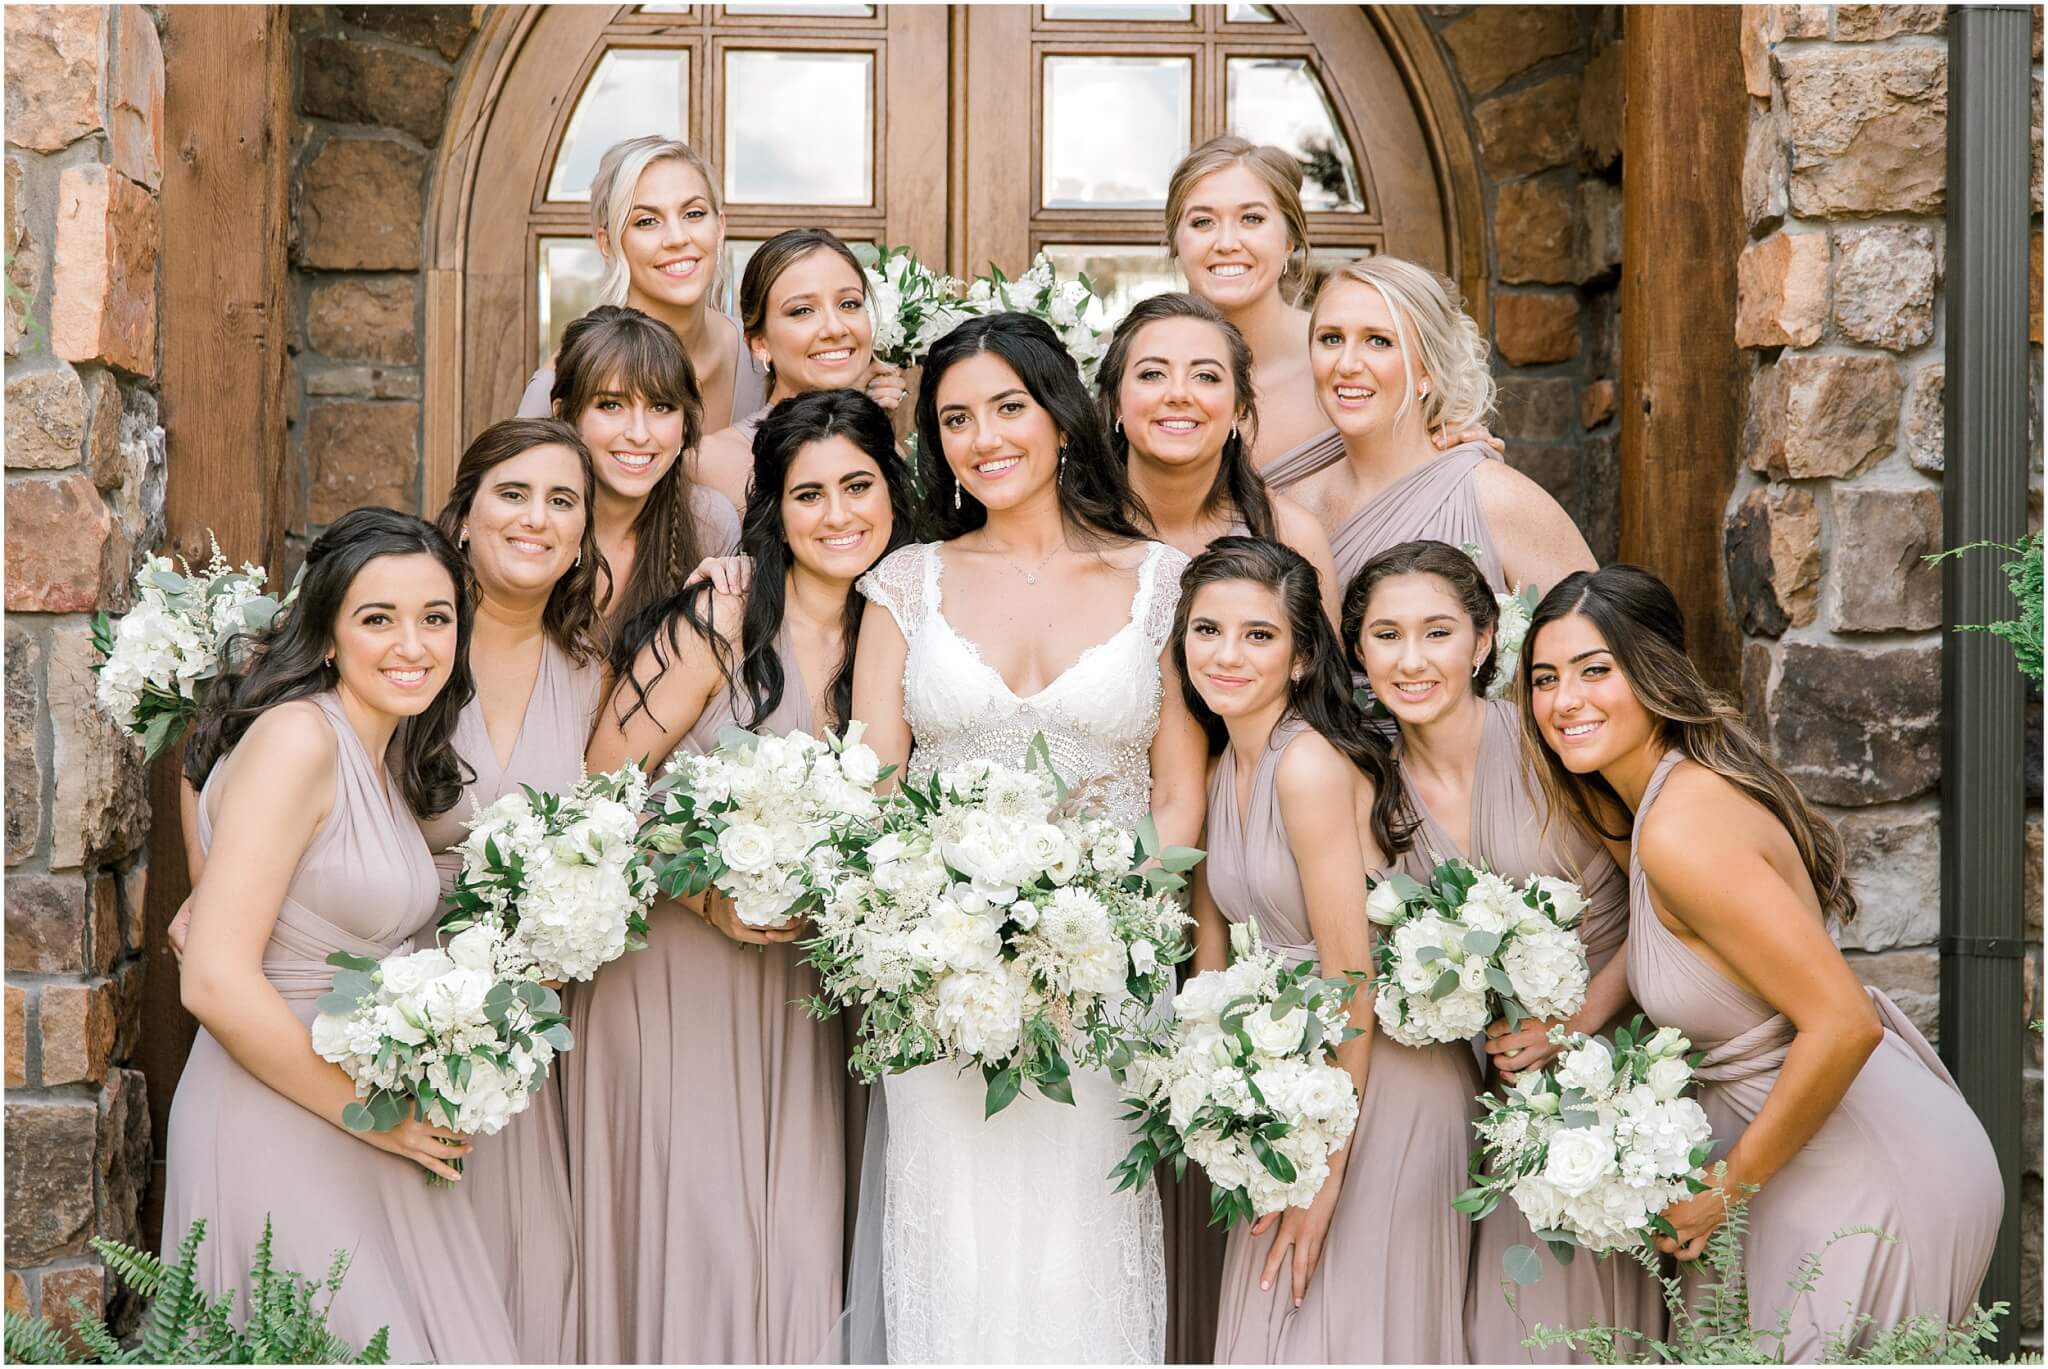 Large bridal party with neutral toned bridesmaid dresses